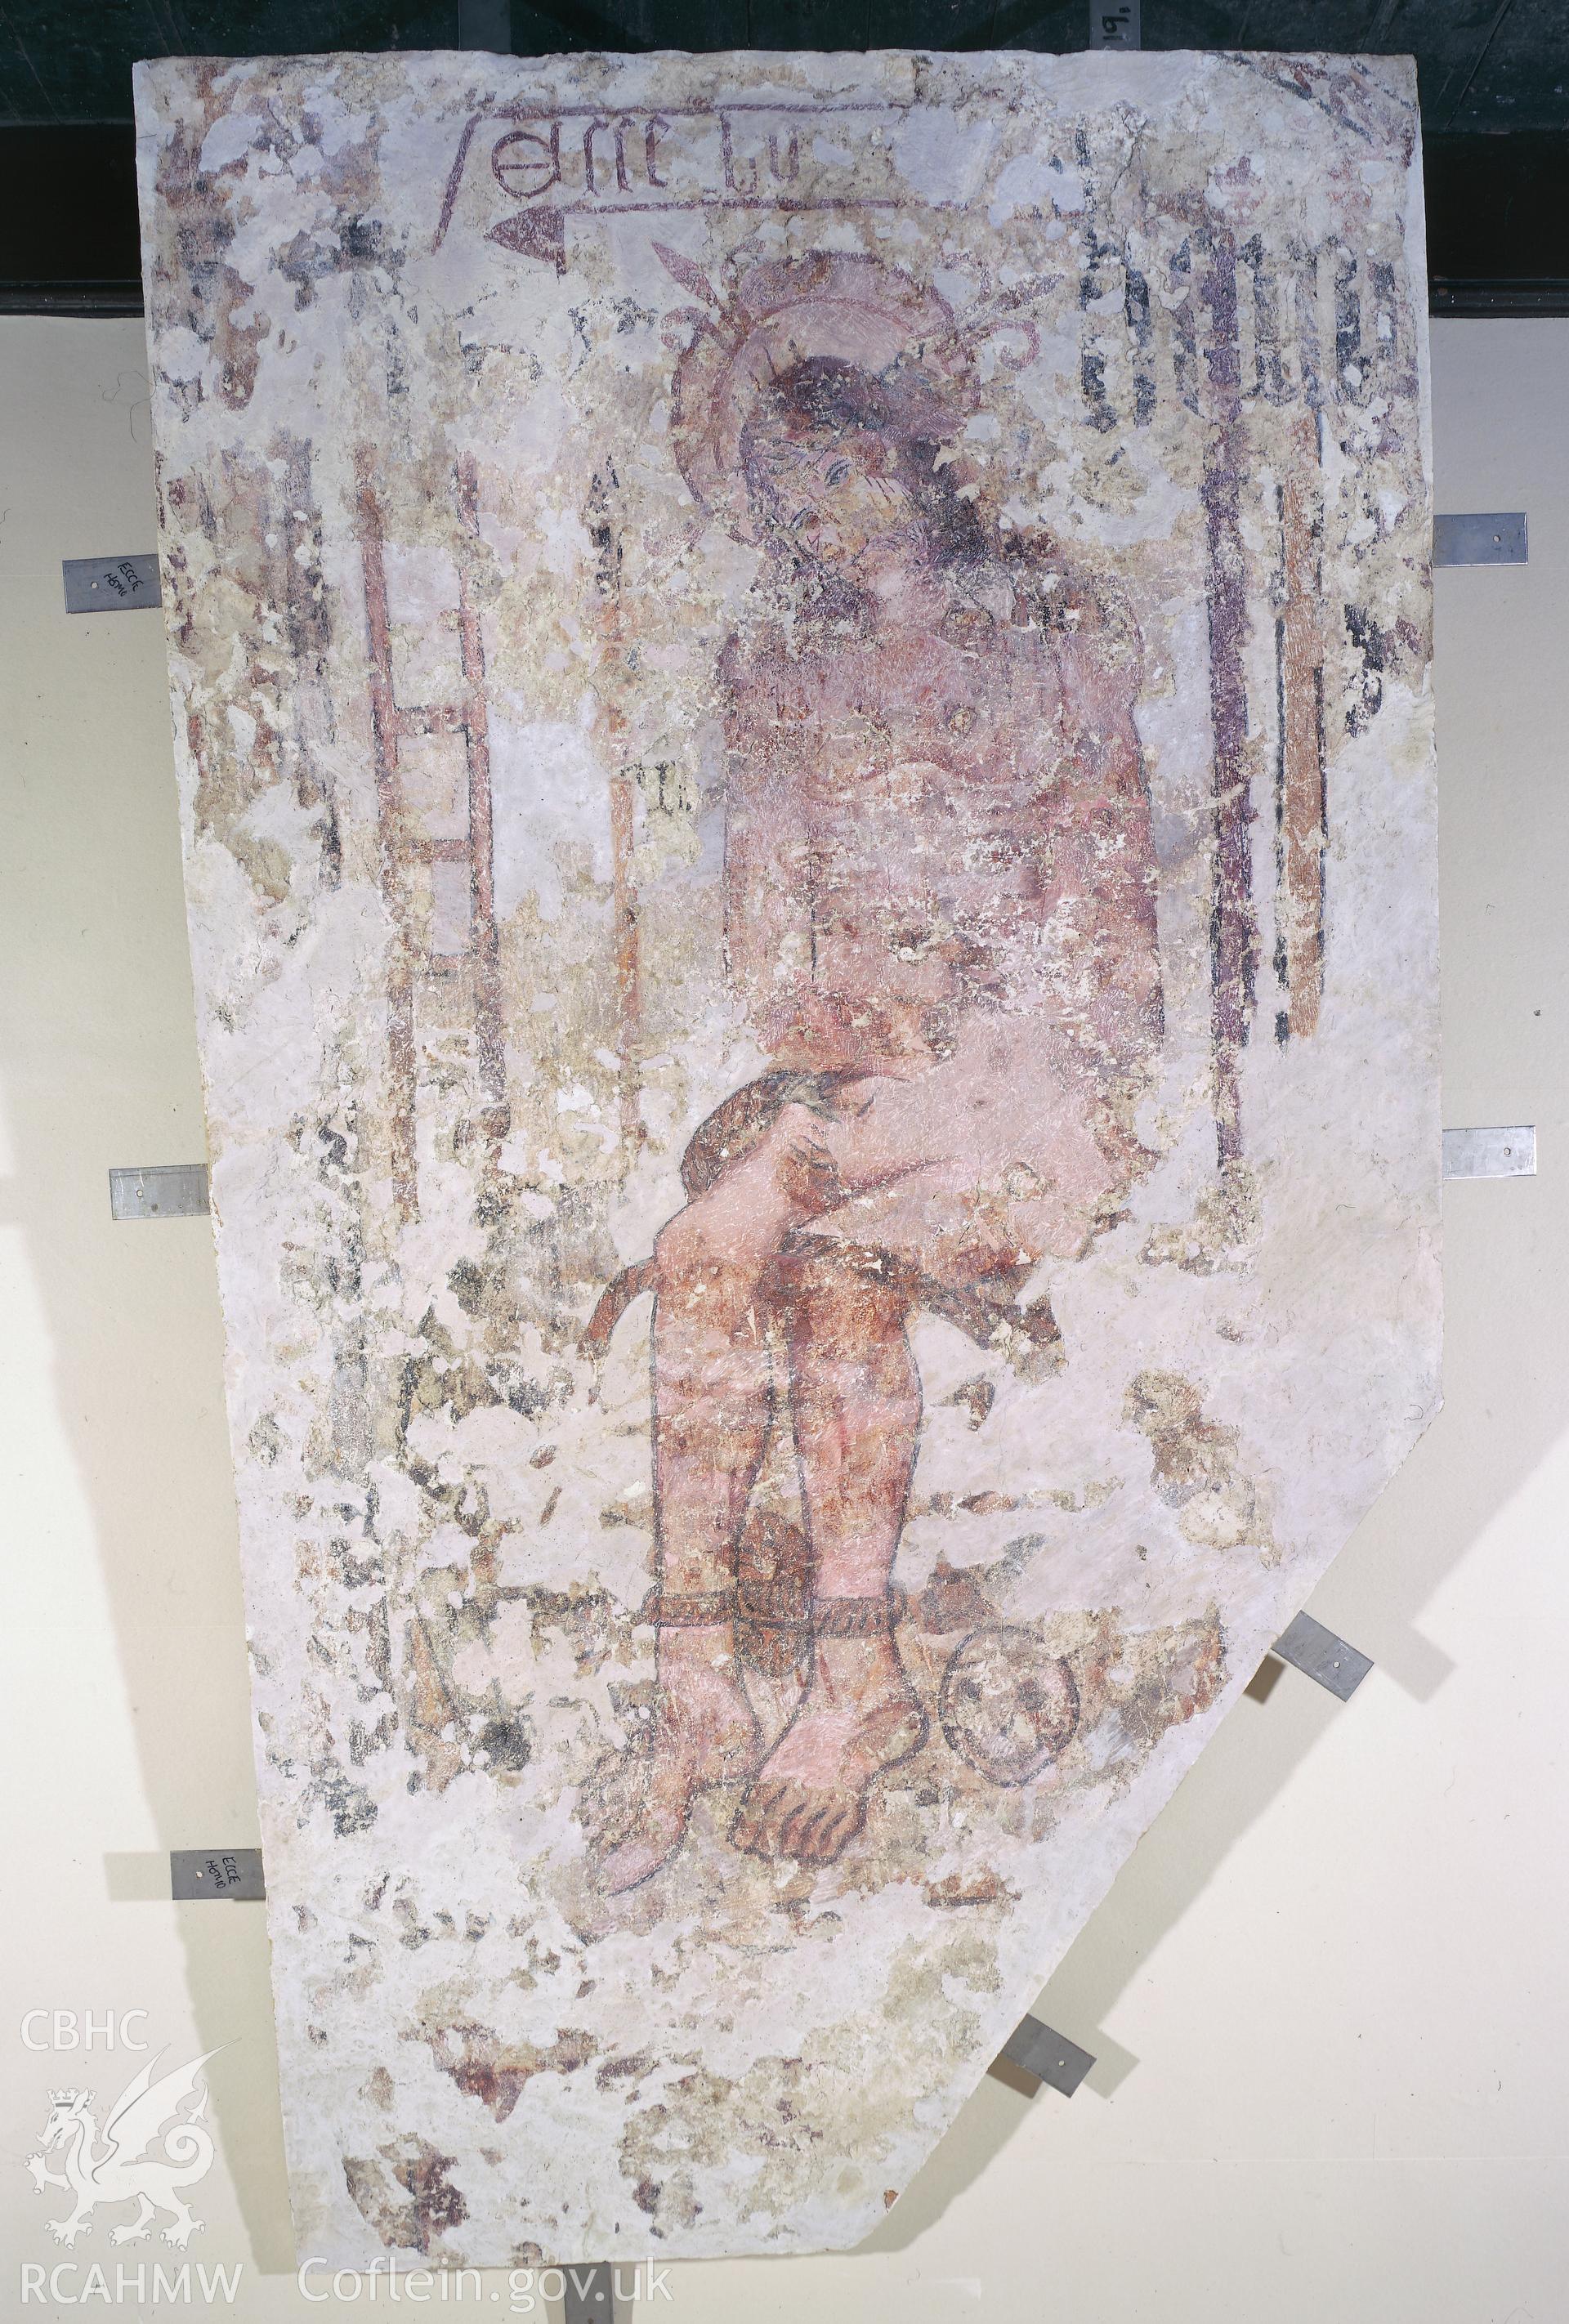 RCAHMW colour transparency of the  wallpainting showing image of Christ, at Llandeilo Talybont Church.